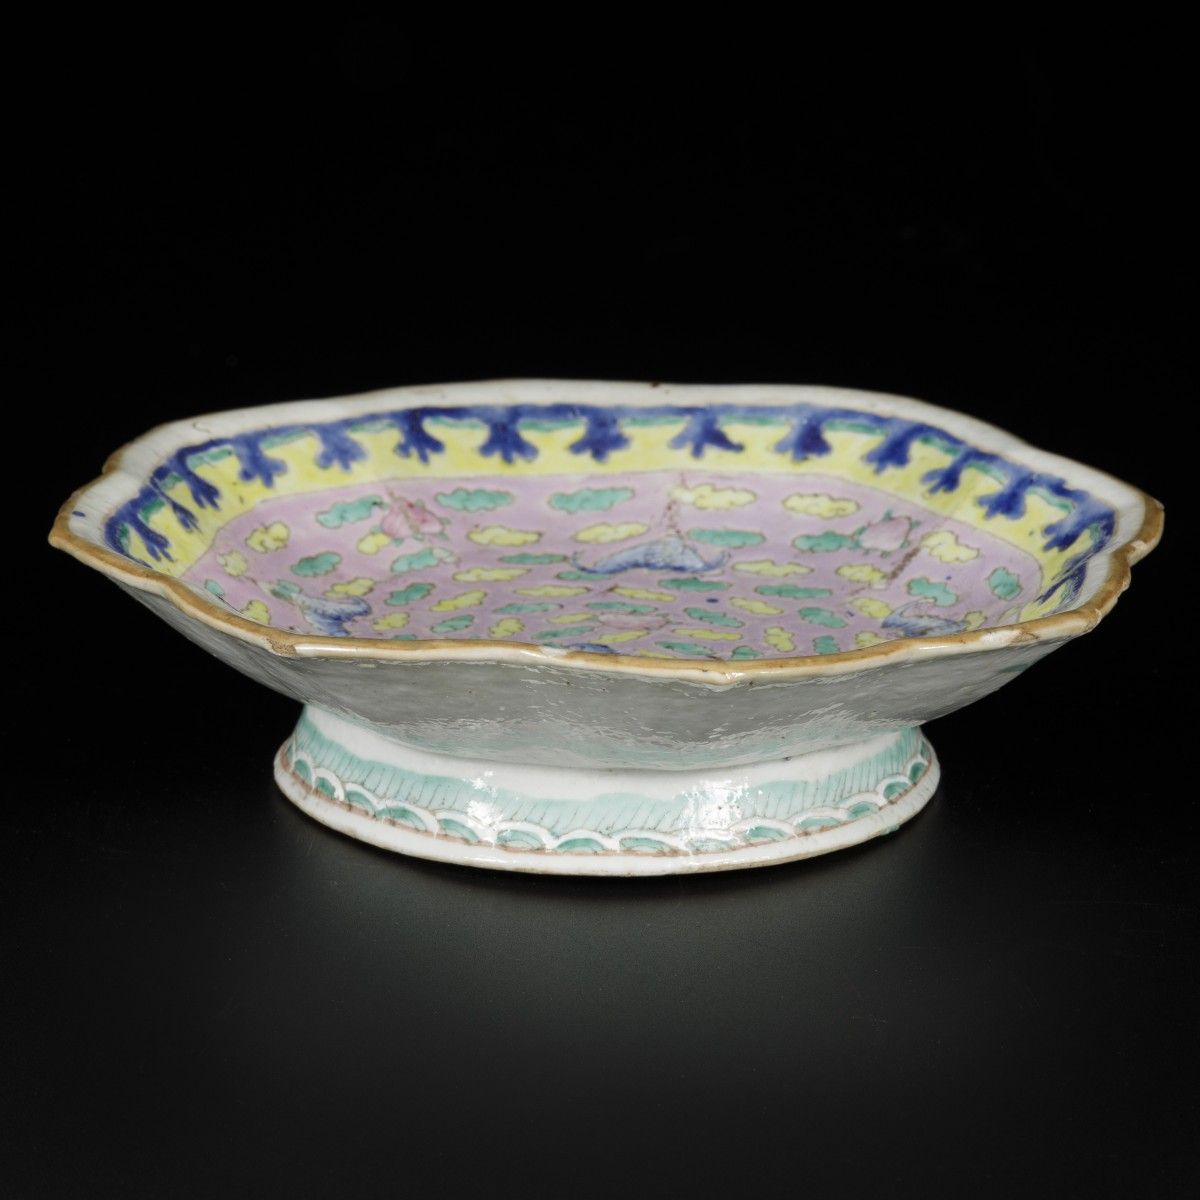 A porcelain bowl with floral decor, China, late 19th century. Dimensioni. 5,5 x &hellip;